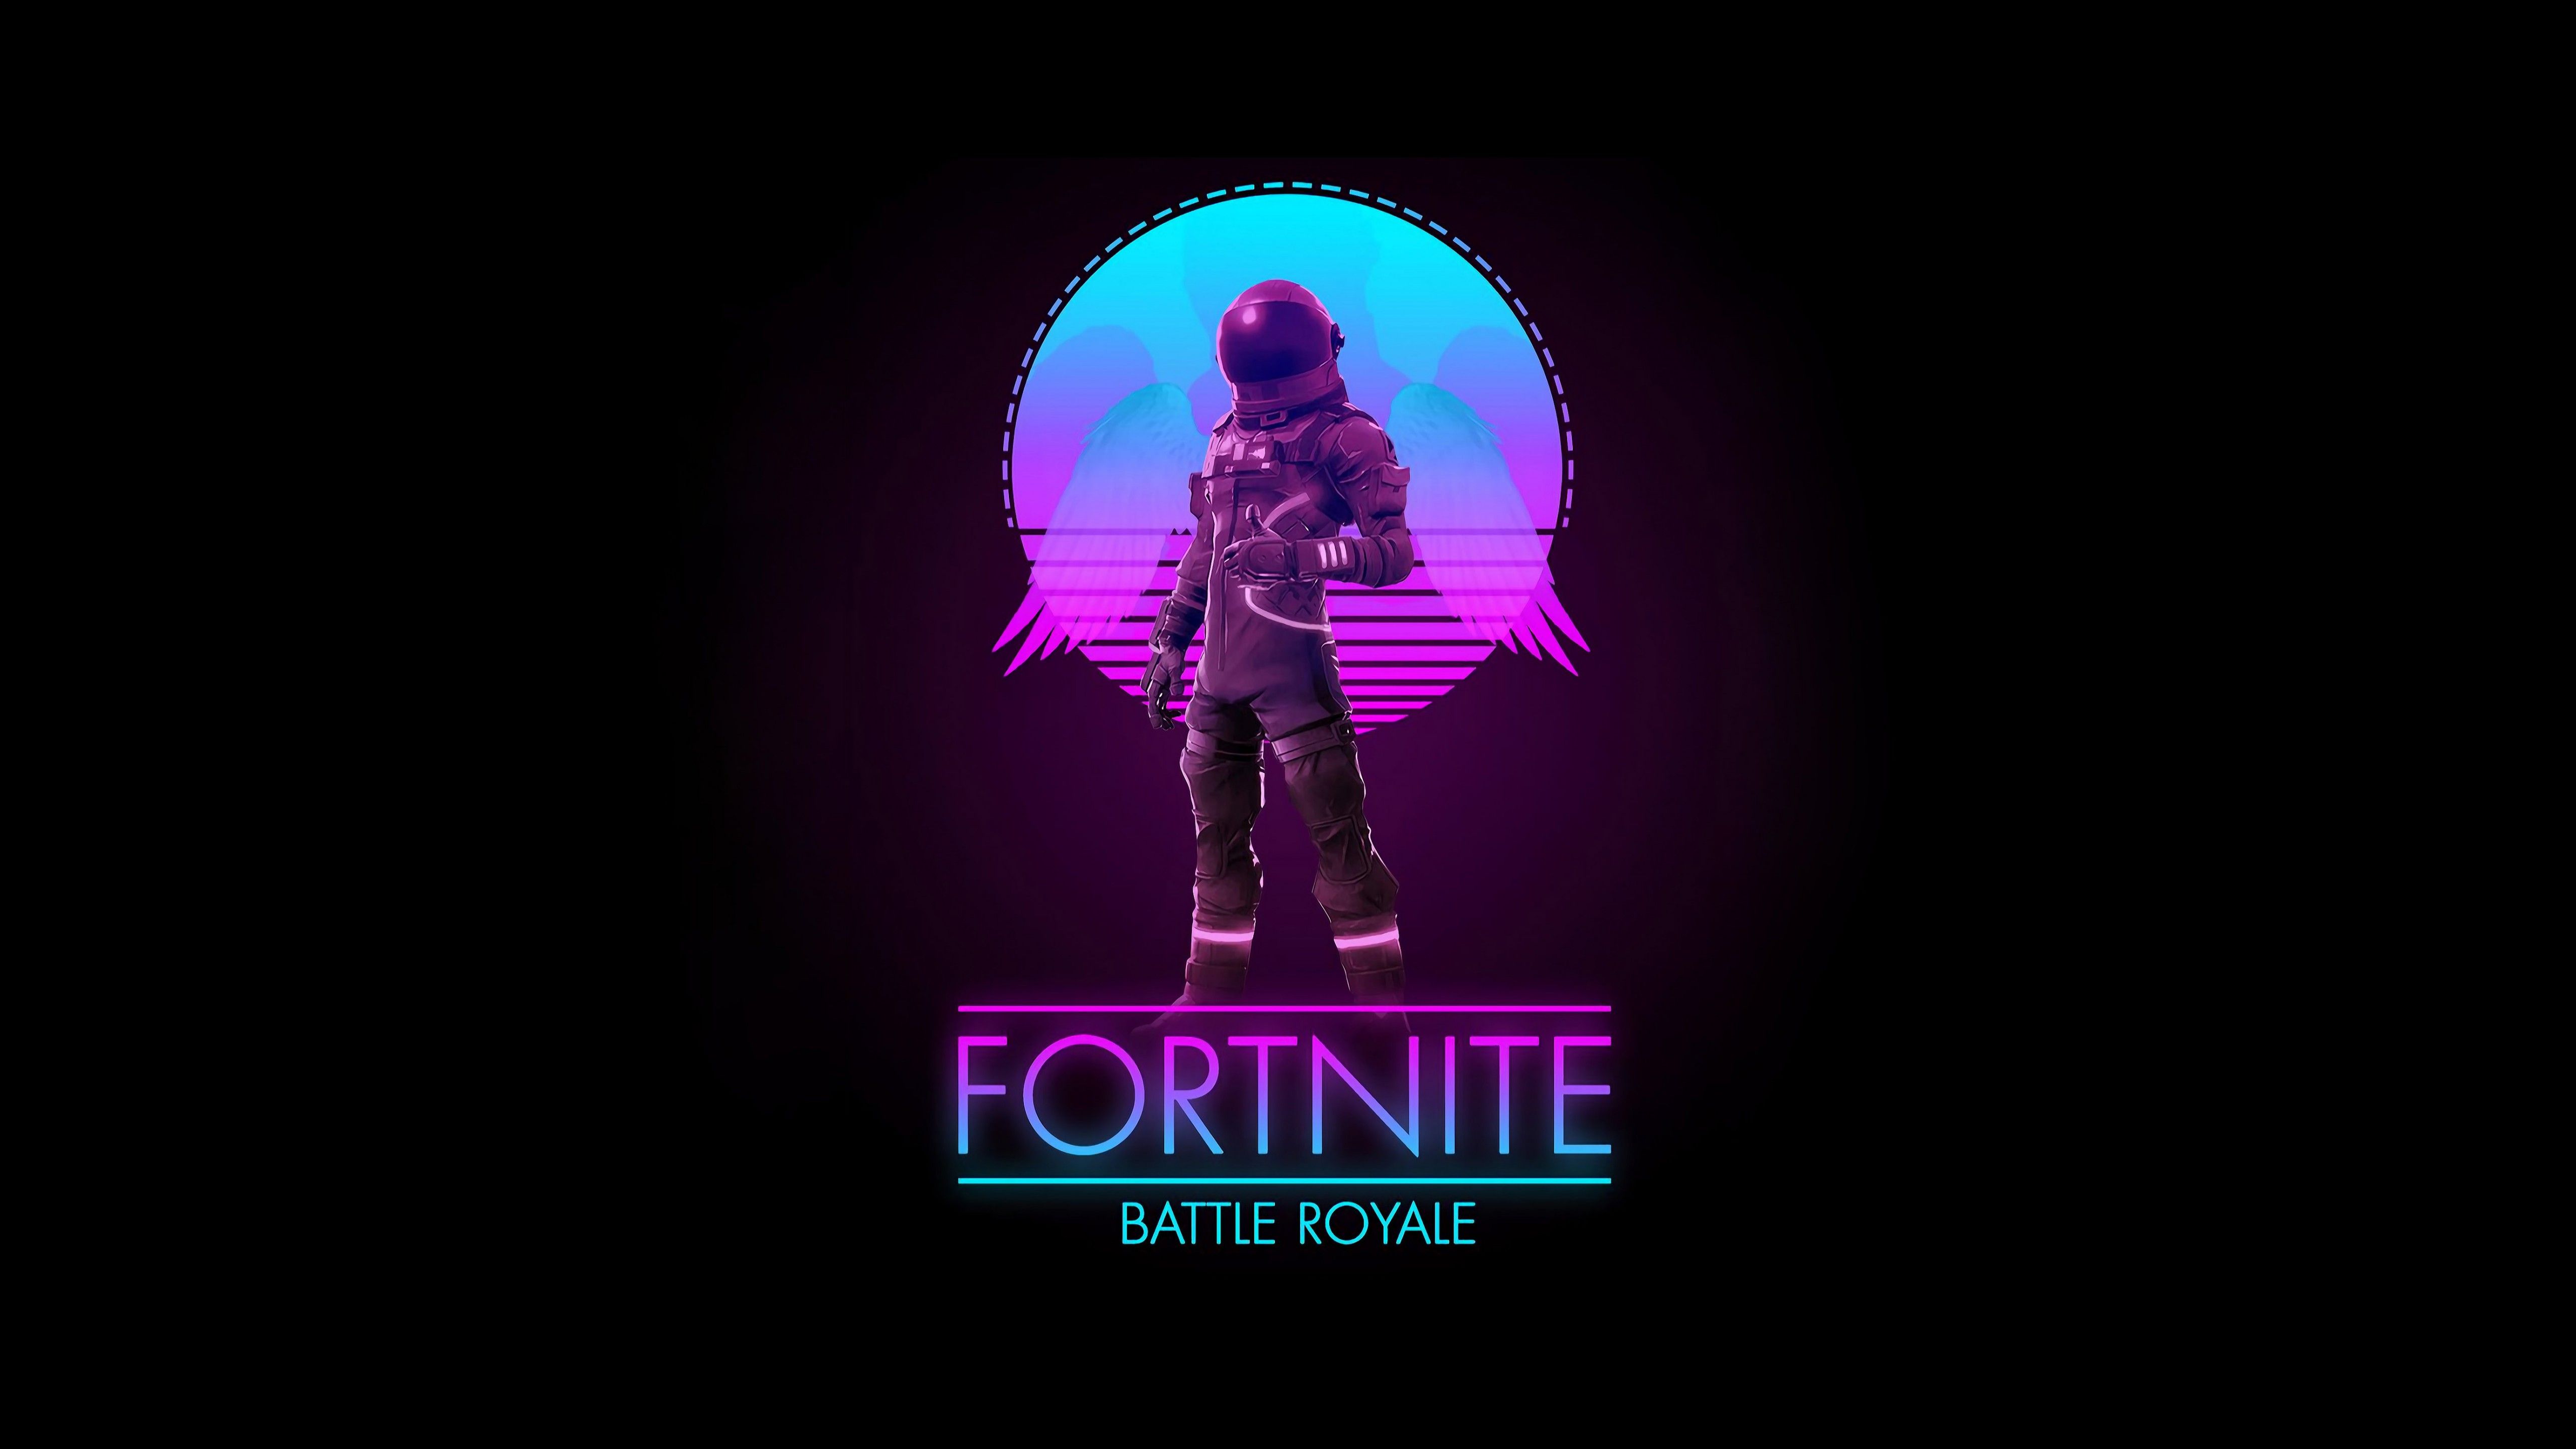 Fortnite 4K Wallpaper, Nintendo Switch, PlayStation Xbox One, Android, iOS, PC Games, Mac OS, Games